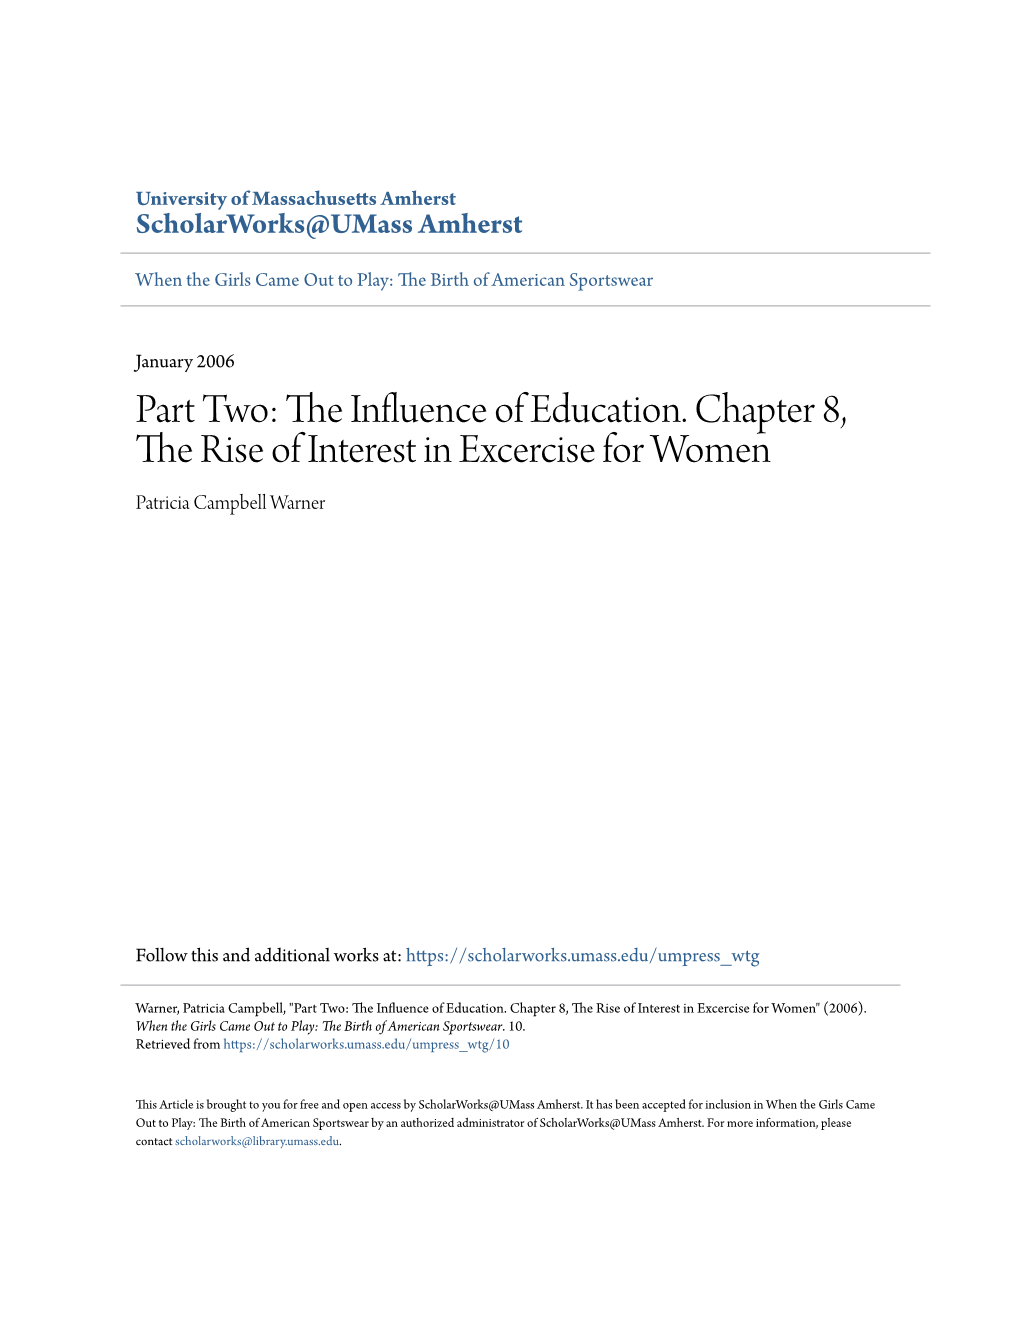 The Influence of Education. Chapter 8, the Rise of Interest in Excercise